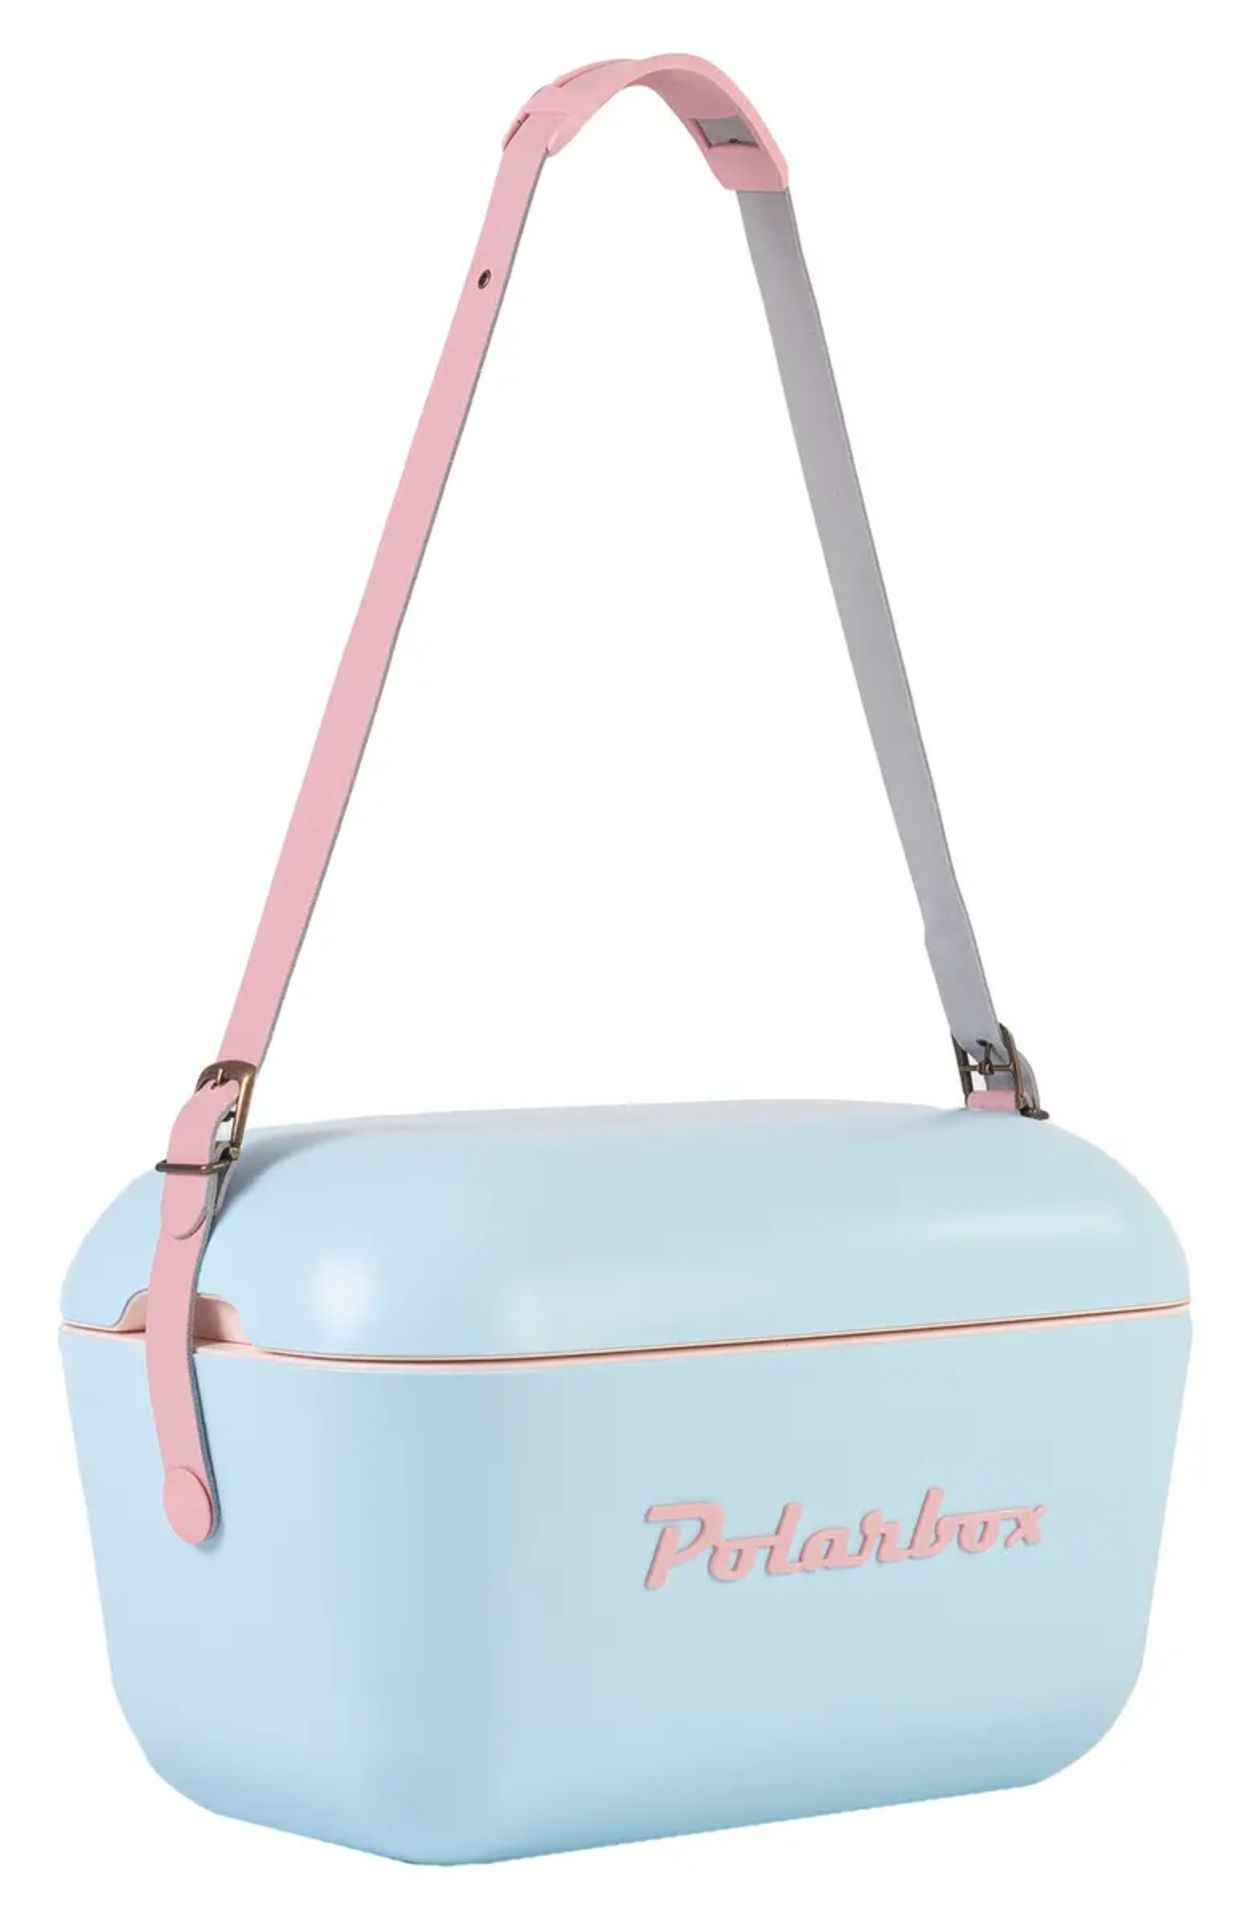 Retro Pop Baby Blue Polarbox 20L Picnic / Camping / Garden Drink Store Insulated Cool Box RRP £6...